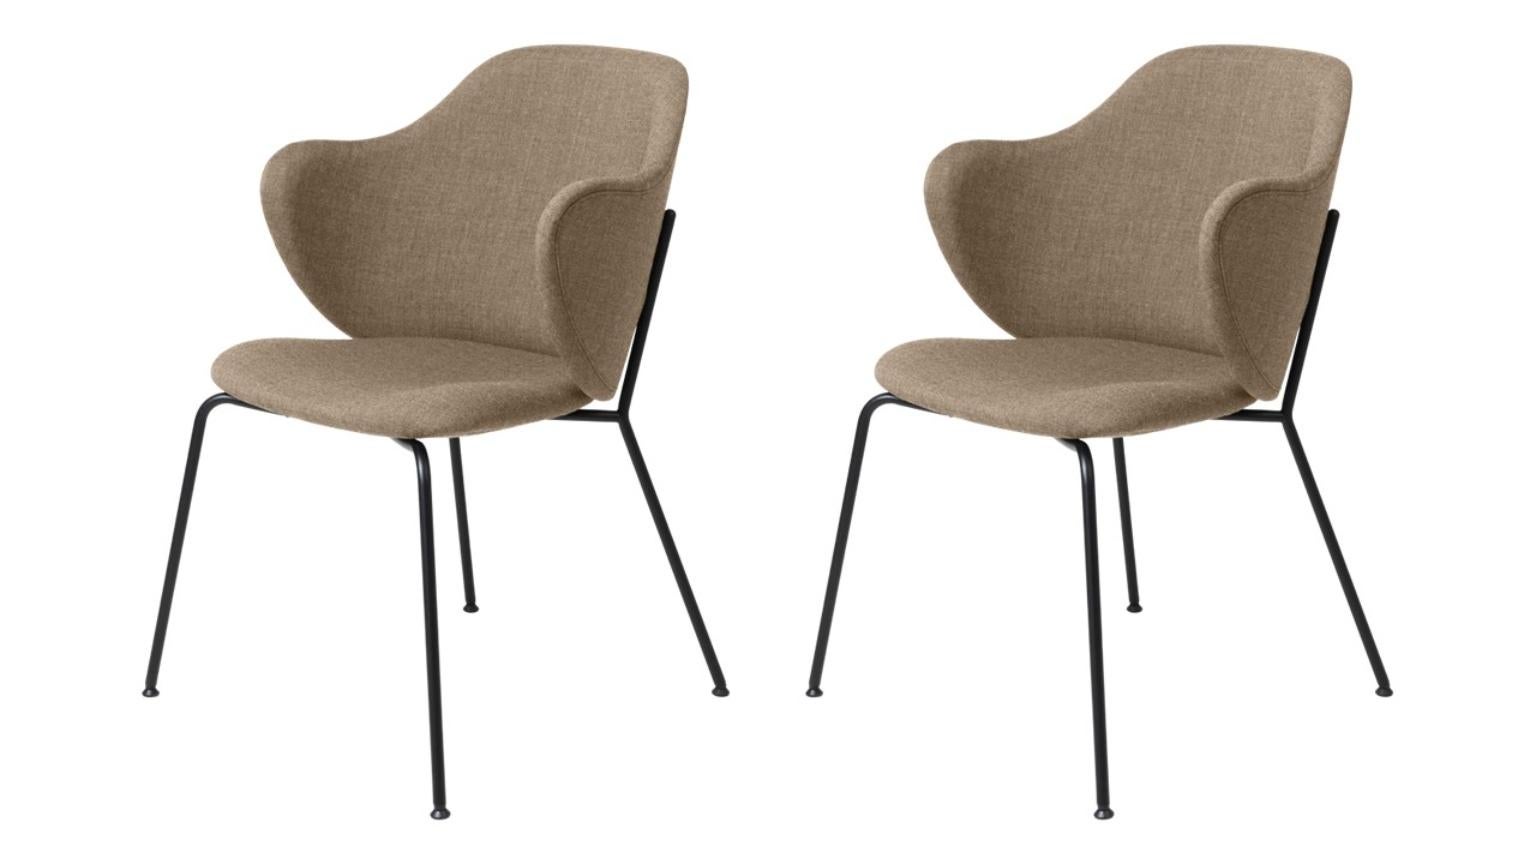 Set of 2 sand remix Lassen chairs by Lassen.
Dimensions : W 58 x D 60 x H 88 cm.
Materials : Textile.

The Lassen chair by Flemming Lassen, Magnus Sangild and Marianne Viktor was launched in 2018 as an ode to Flemming Lassen’s uncompromising